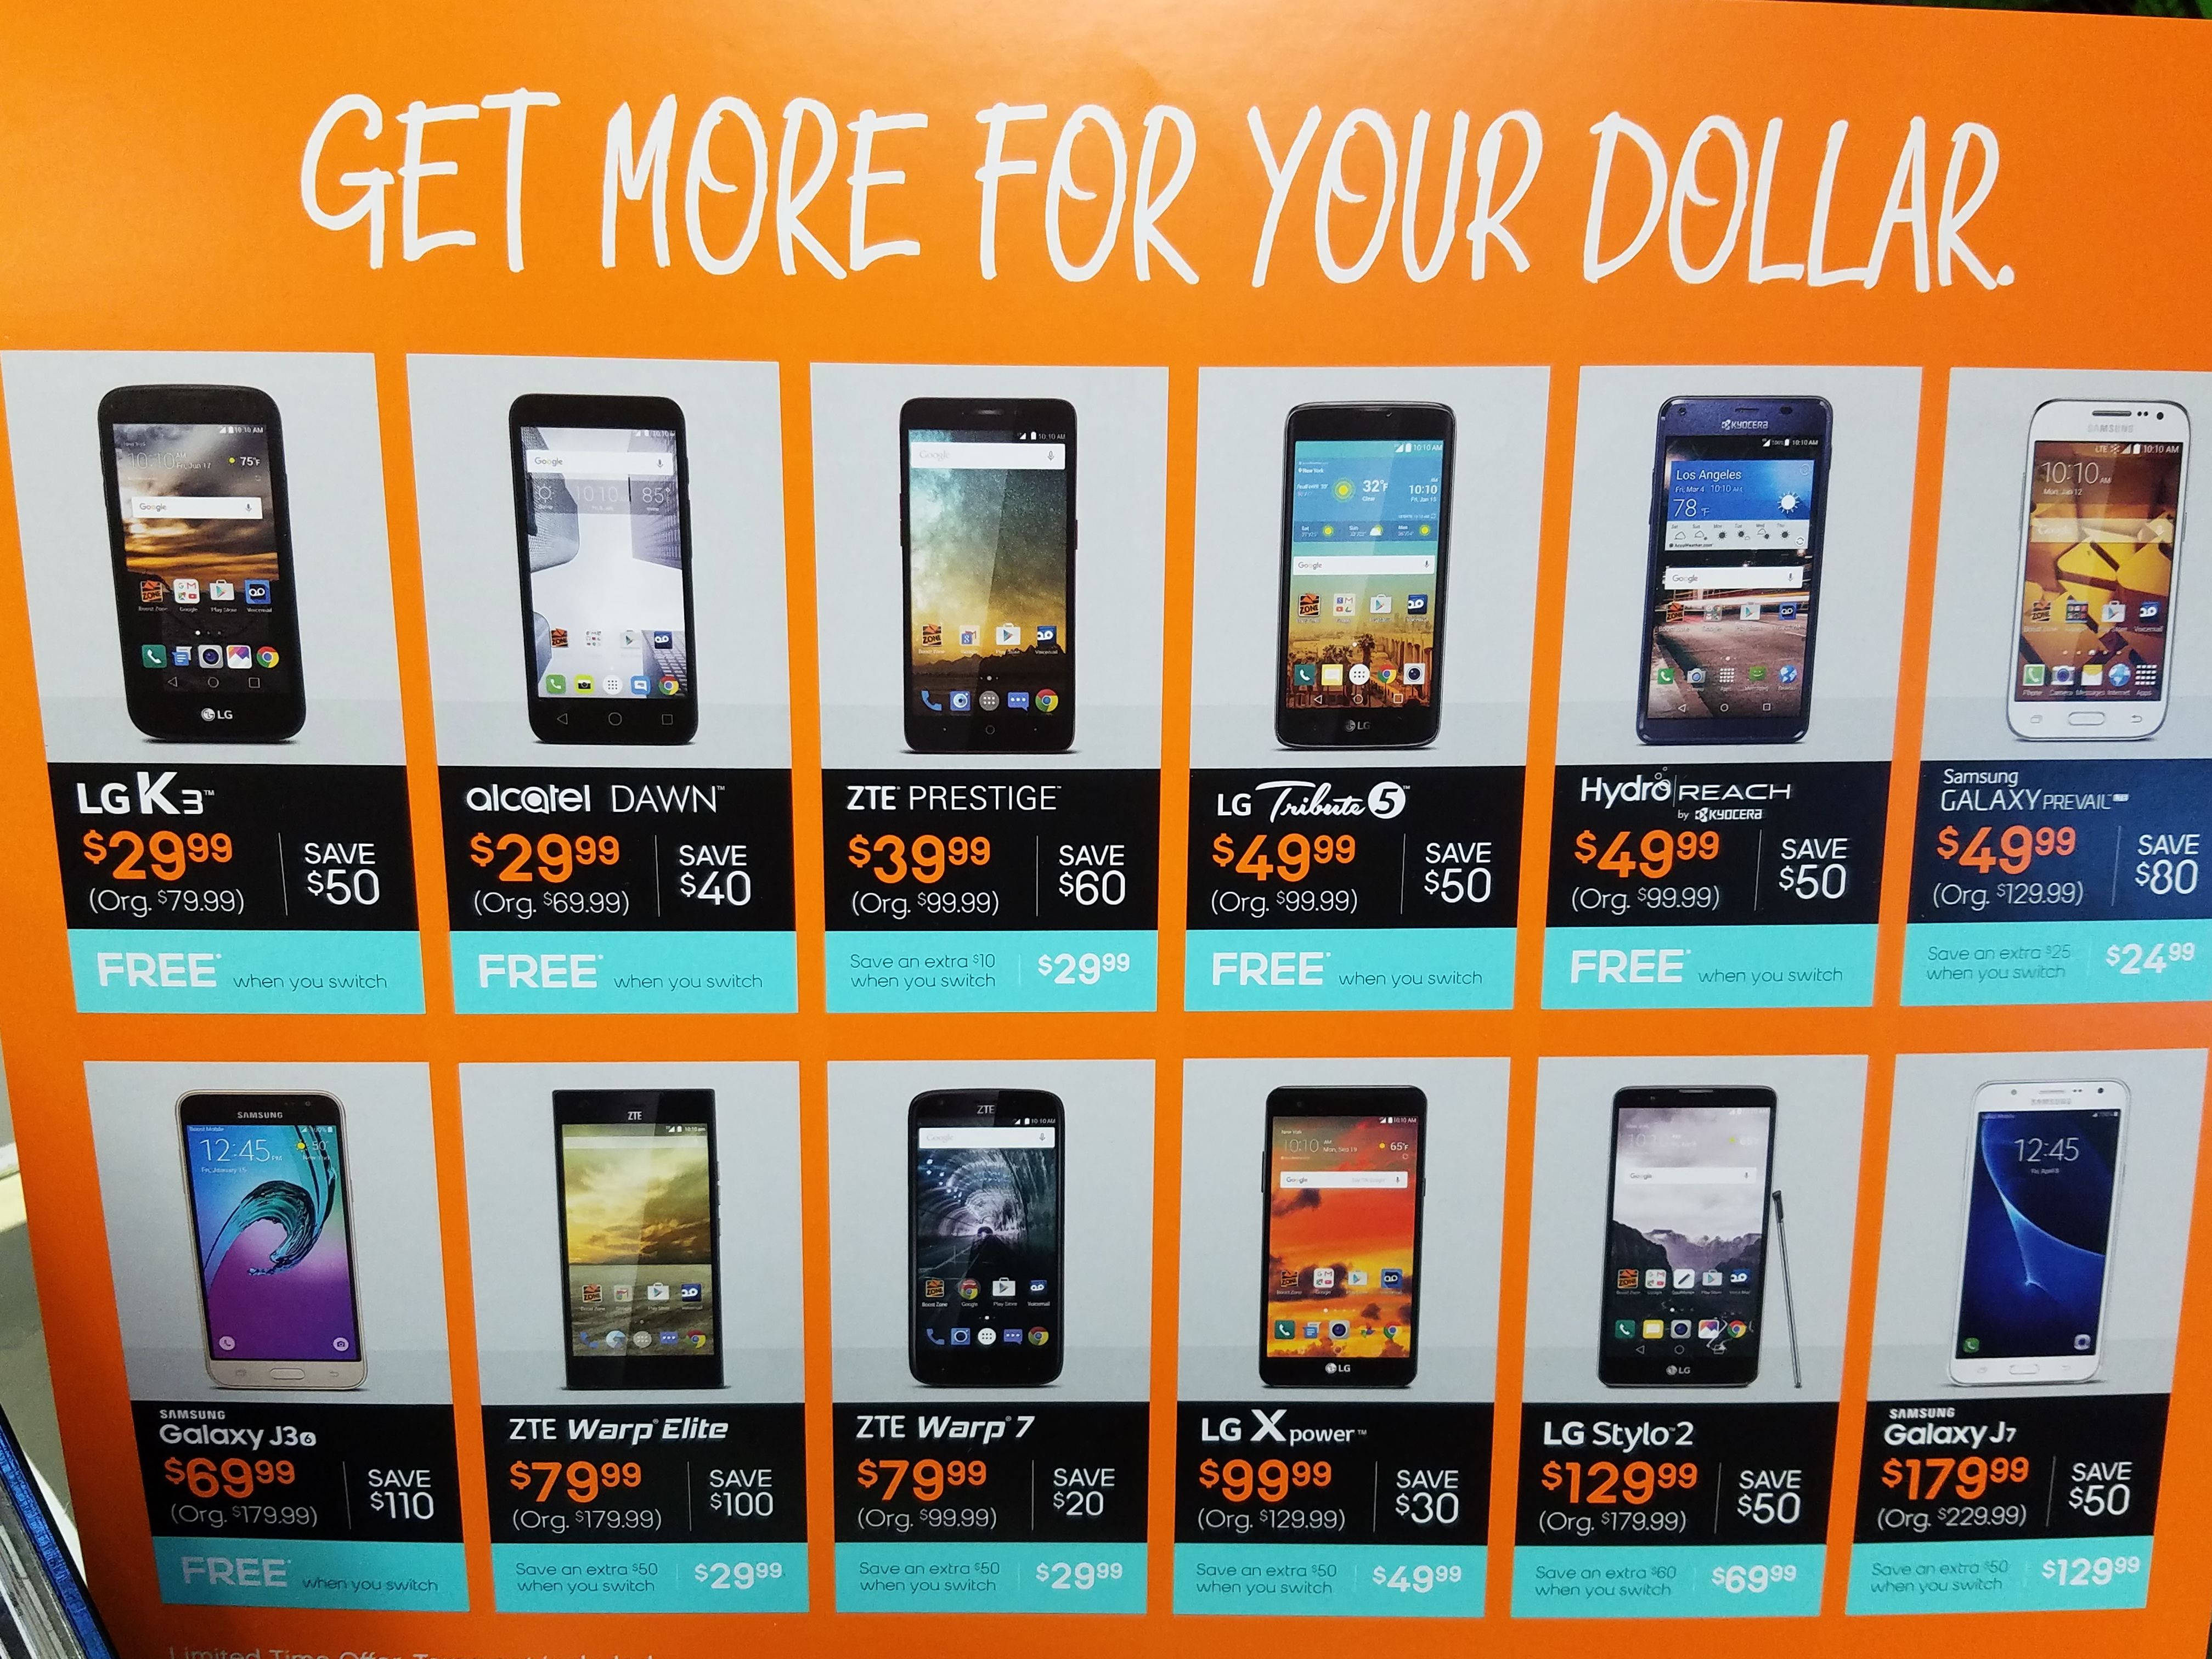 AT&T, Verizon, Boost Mobile, Cell Phone Service, Accessories, Cell Phone Carriers